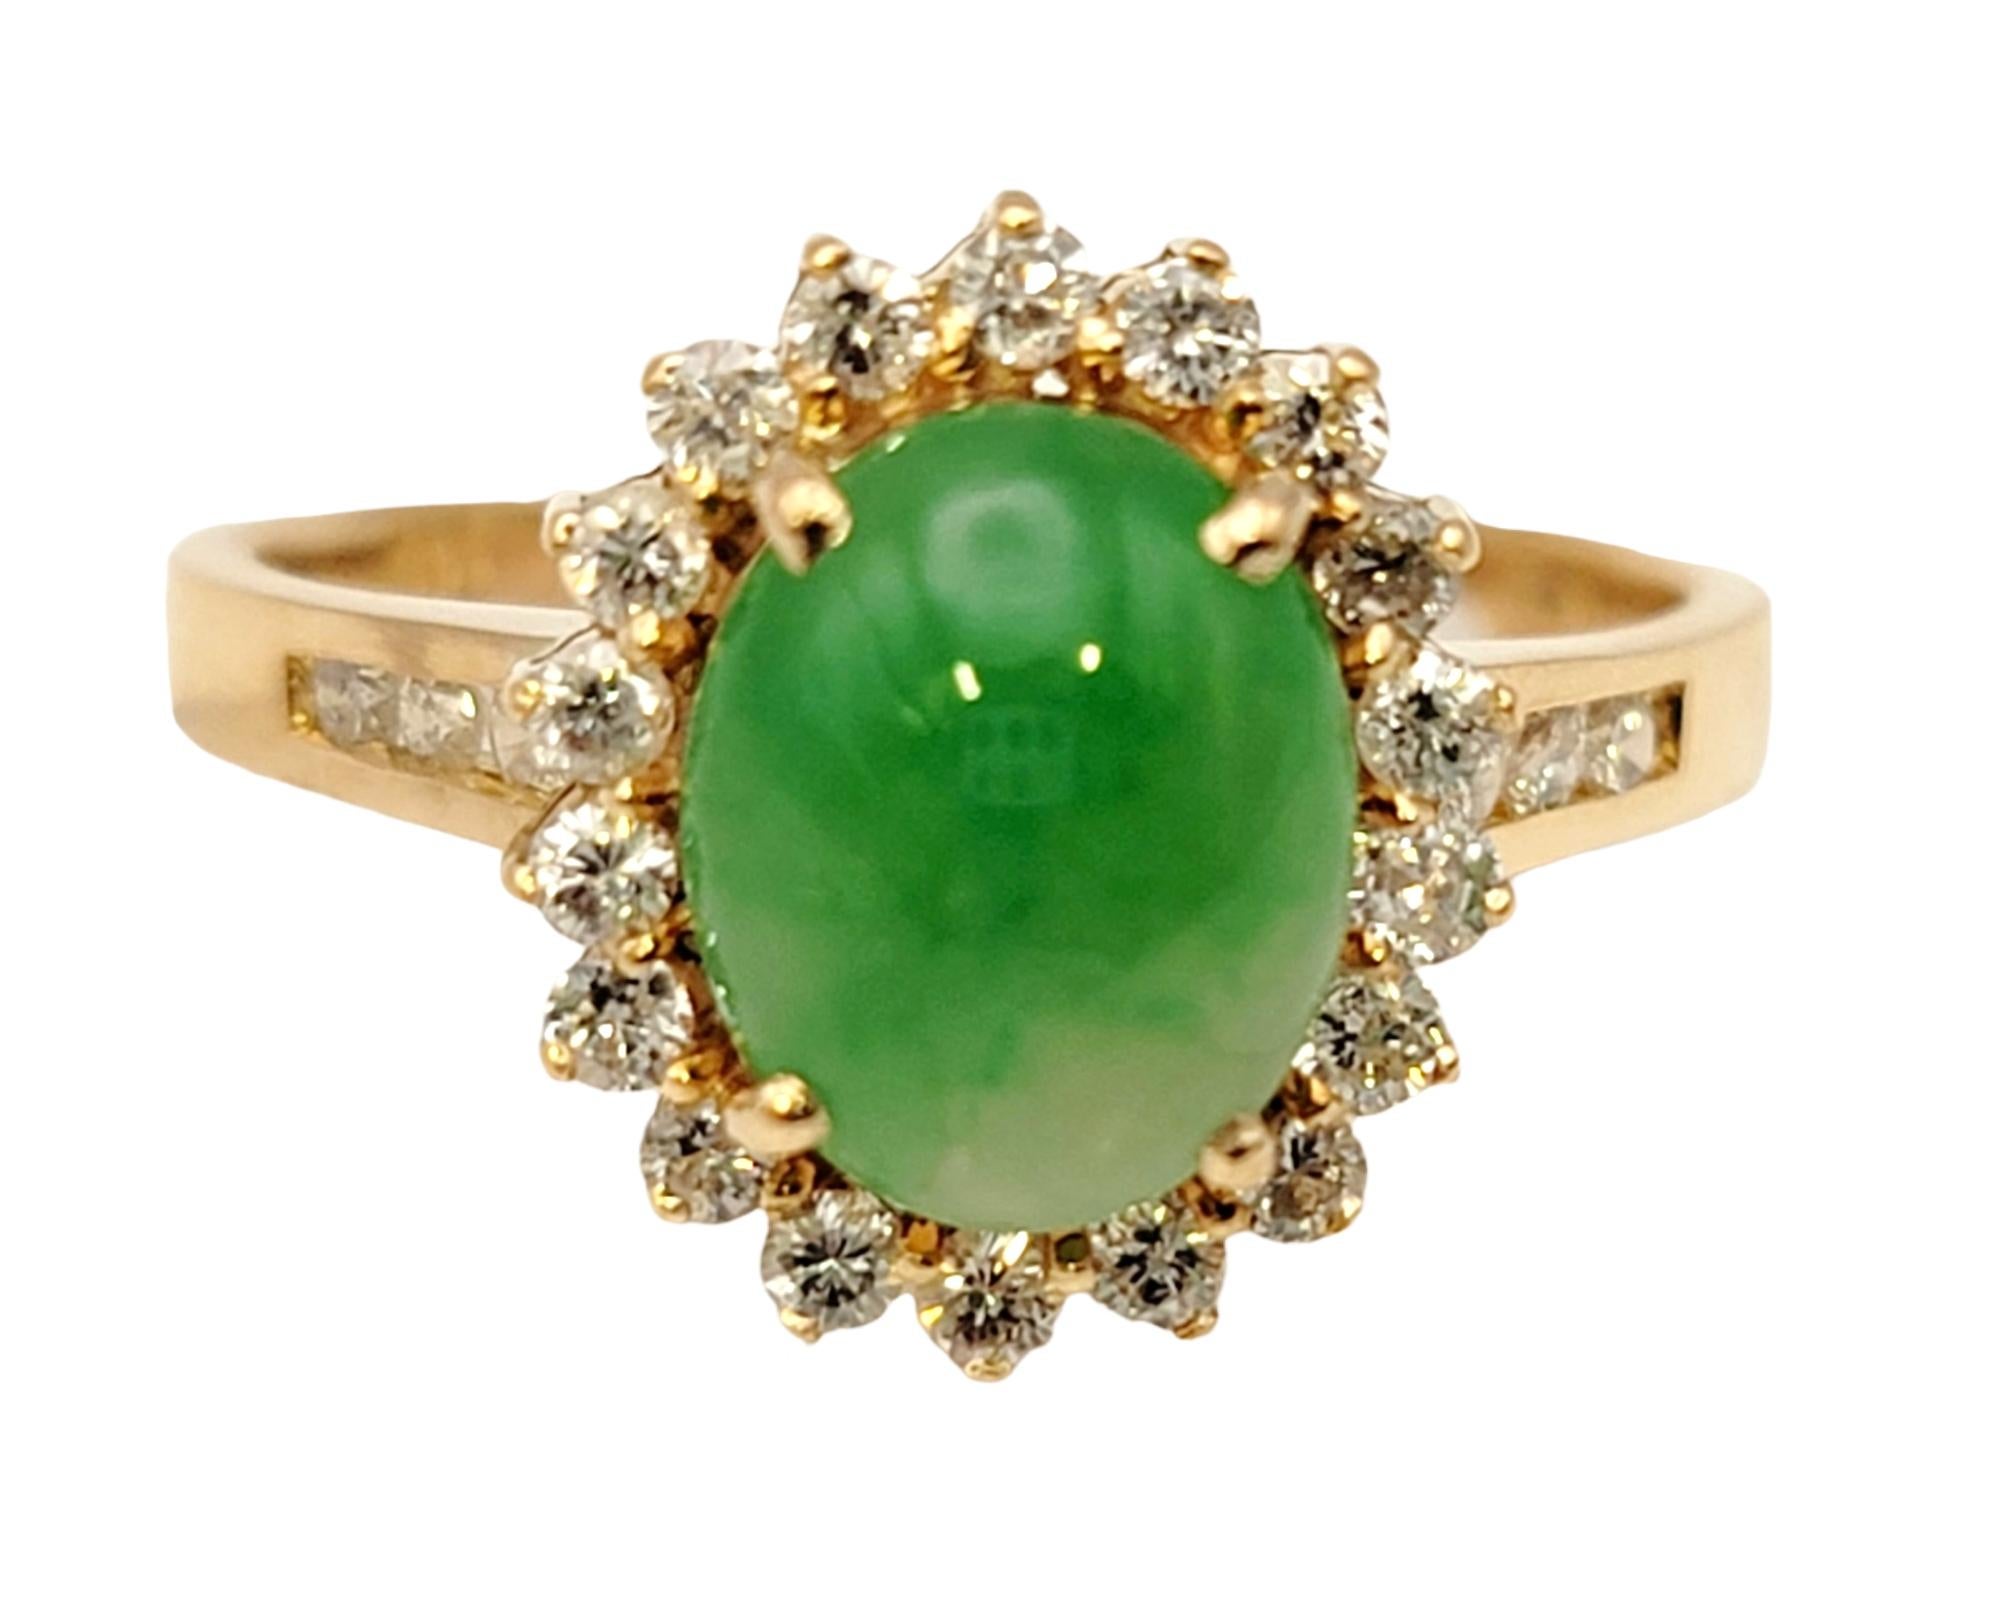 Ring size 7.5

Absolutely gorgeous jade and diamond halo ring. This amazing piece features a single oval cabochon natural jade stone prong set among a glittering halo of 18 round diamonds. Additional diamonds are set along the top portion of the